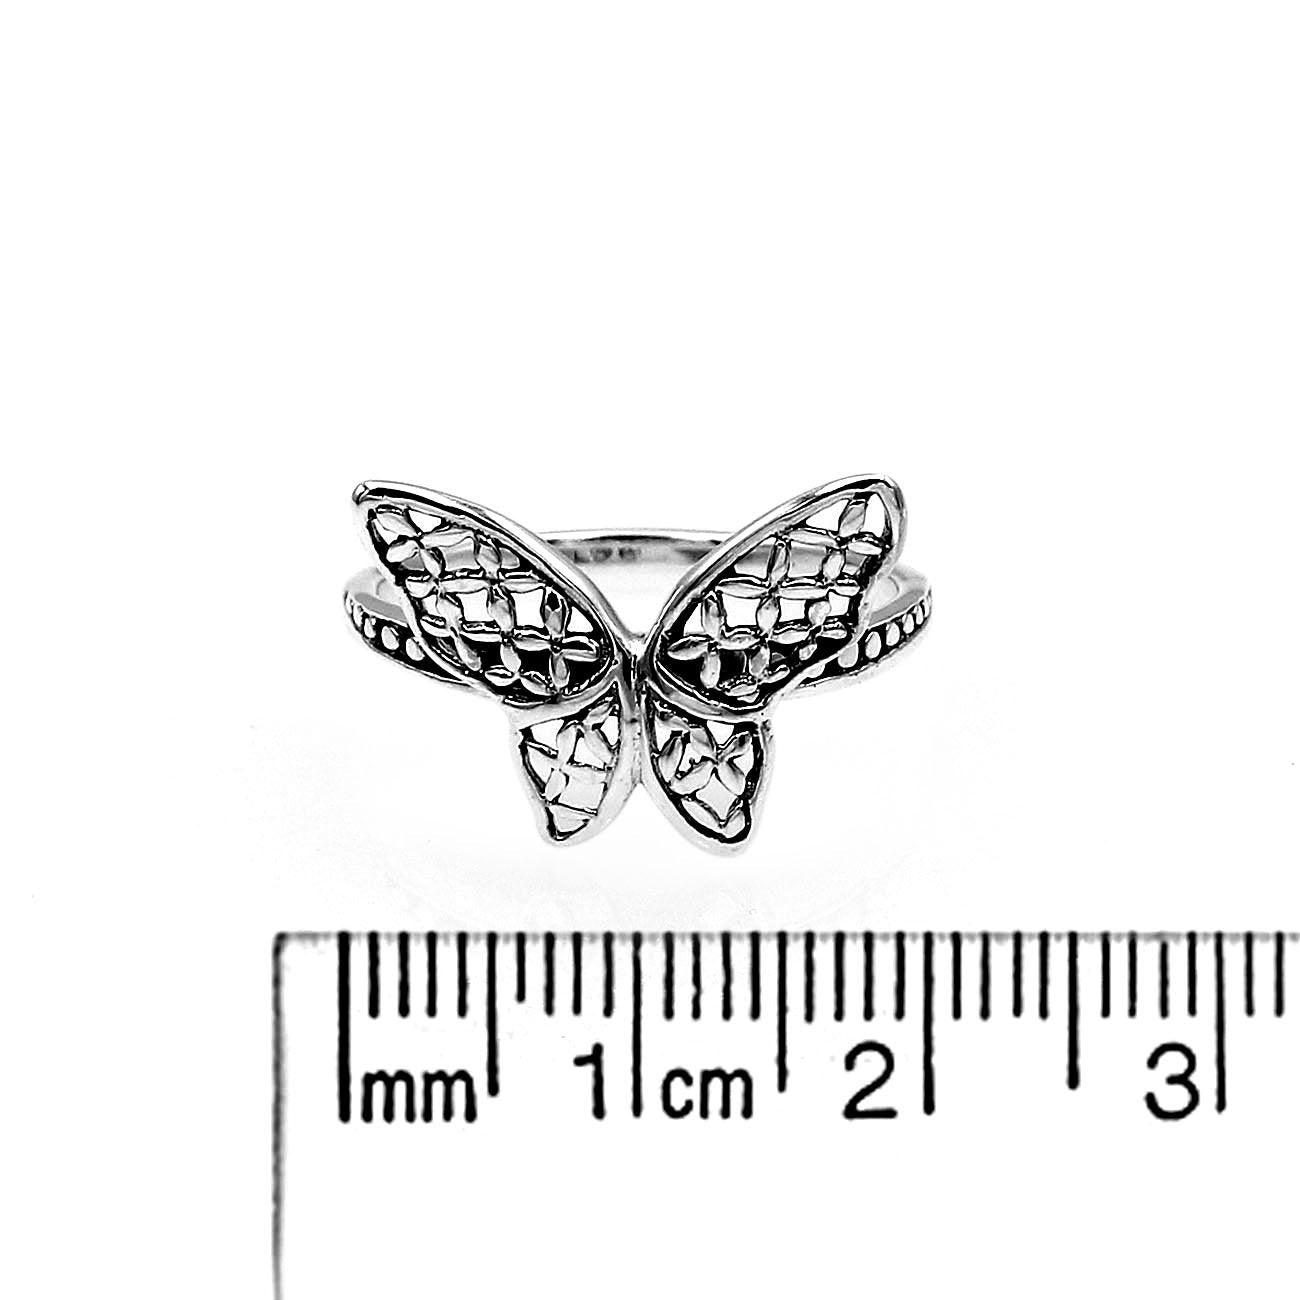 Handmade Butterfly Luck Hope Ring in 925 Sterling Silver Size L , M , N , O , P , Q - Inspiring Jewellery